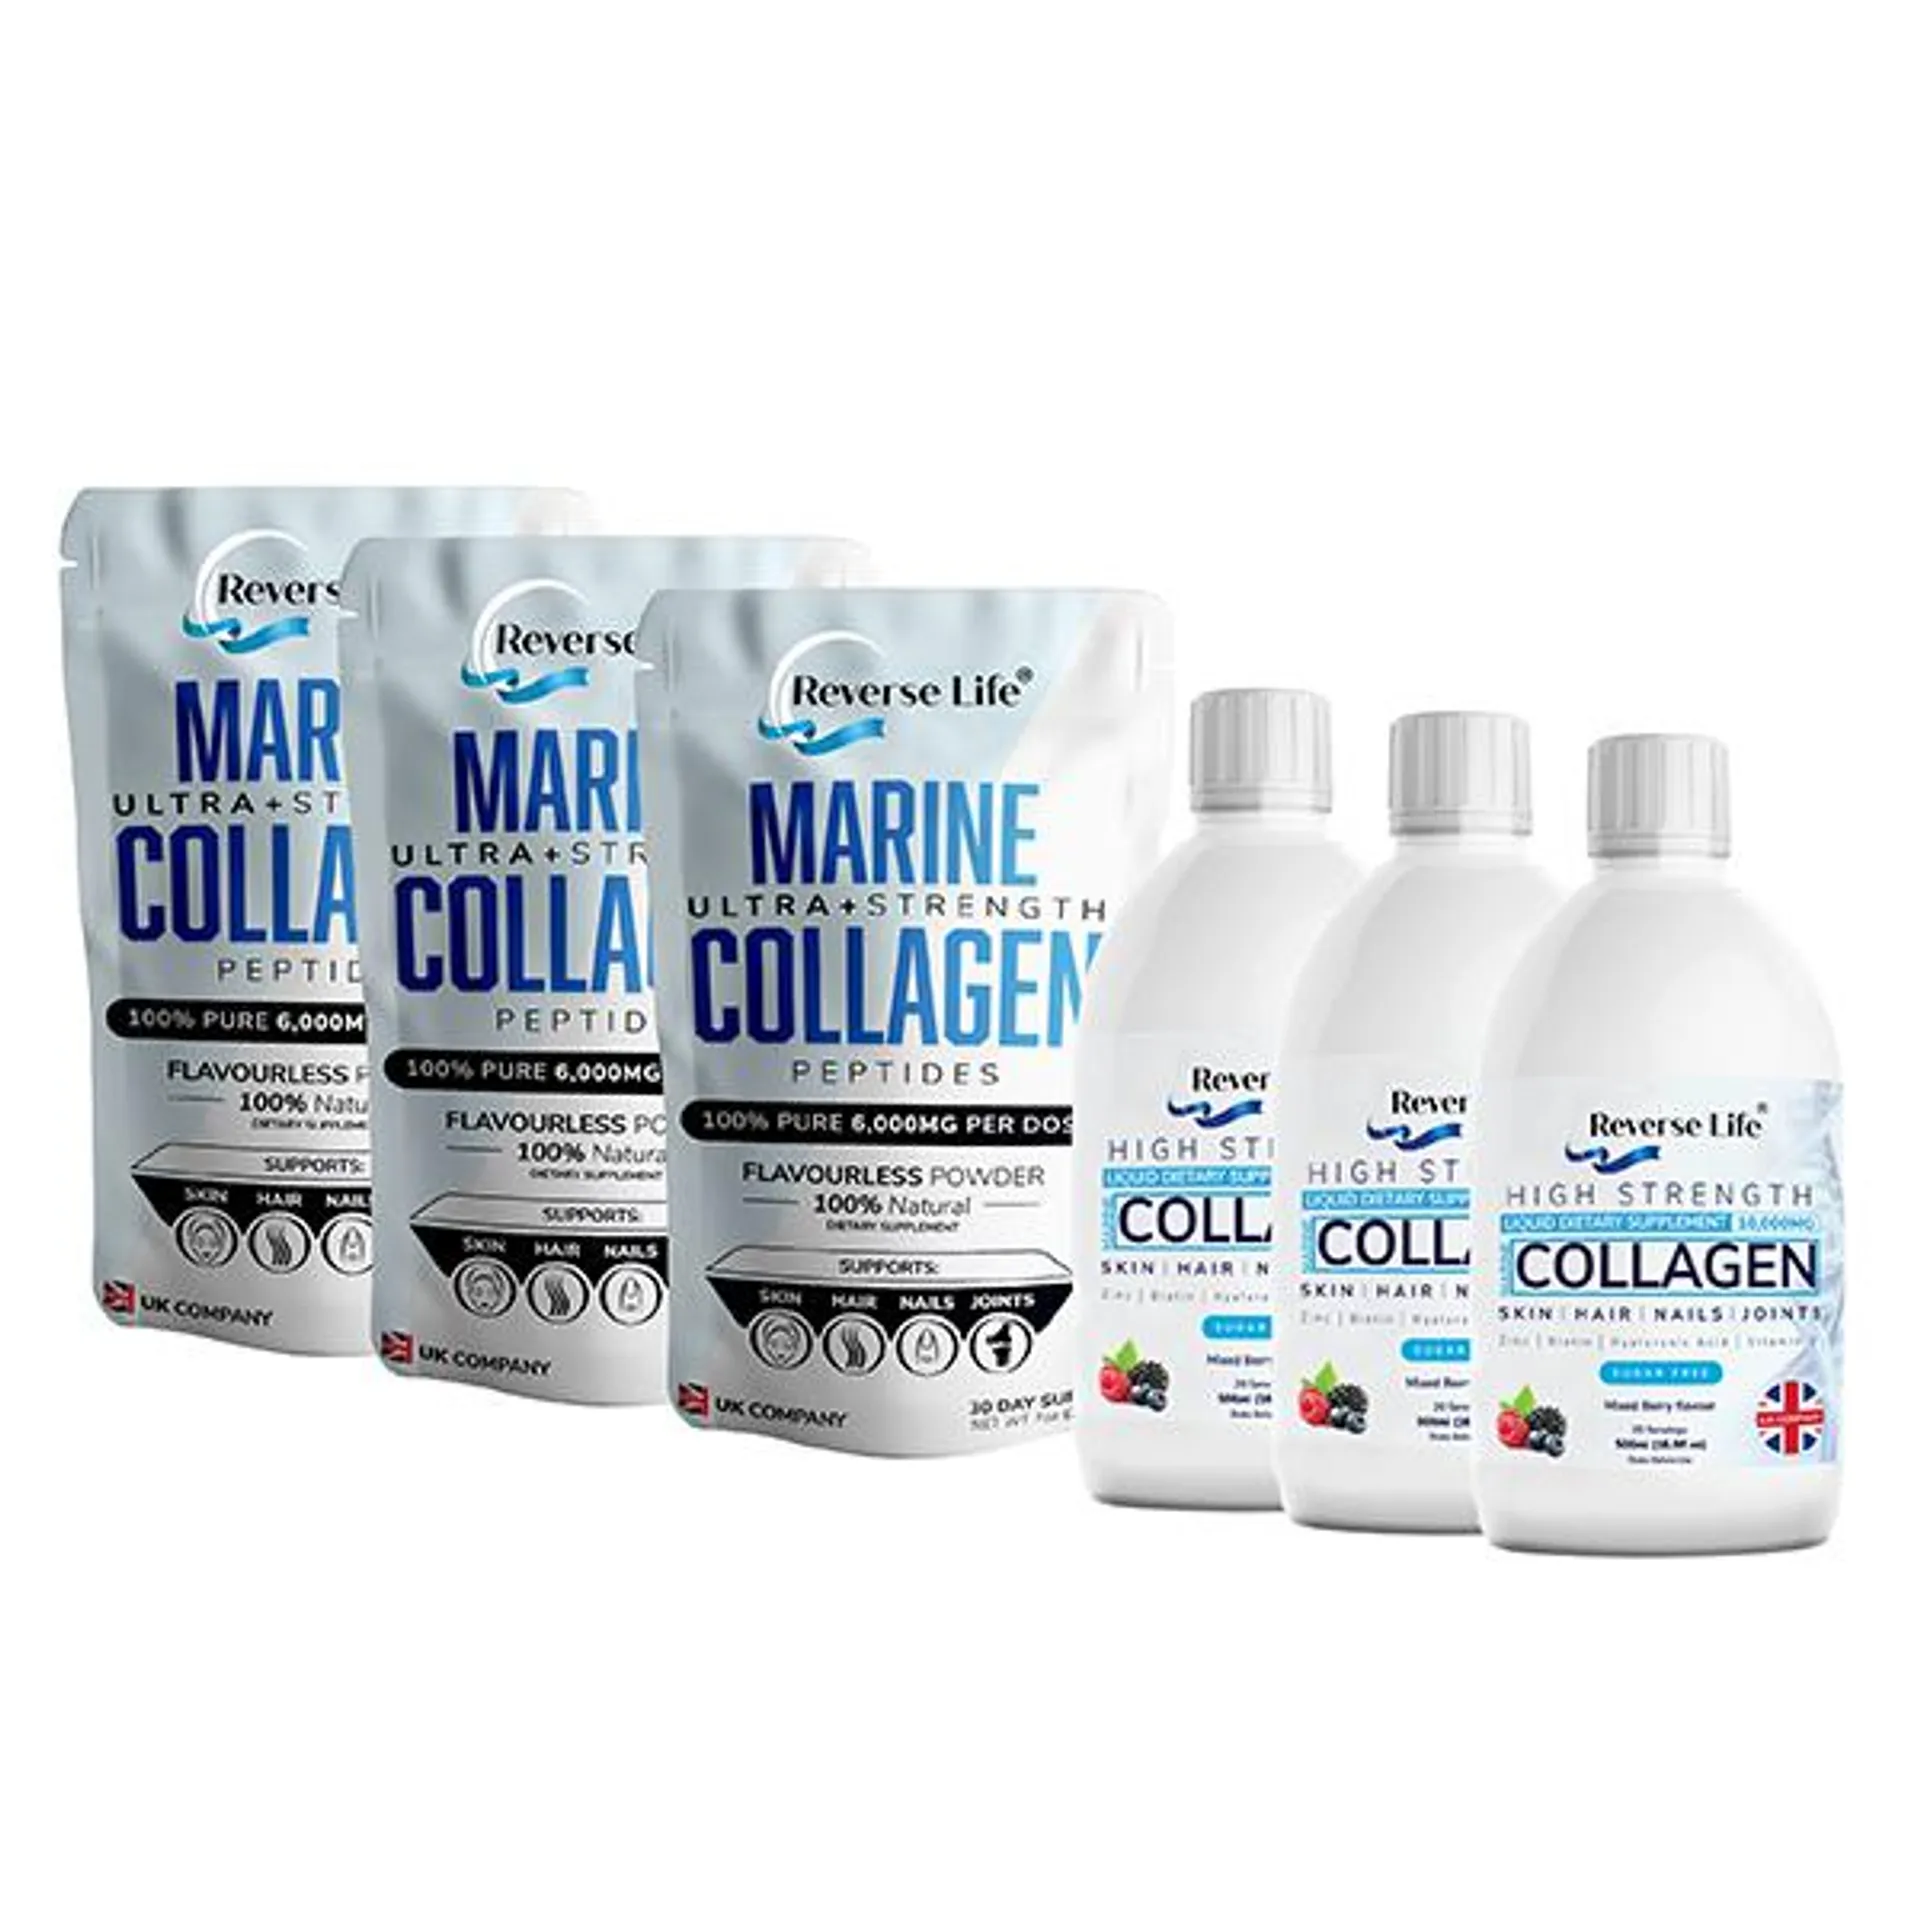 Reverse Life 150 Days of Collagen Collection